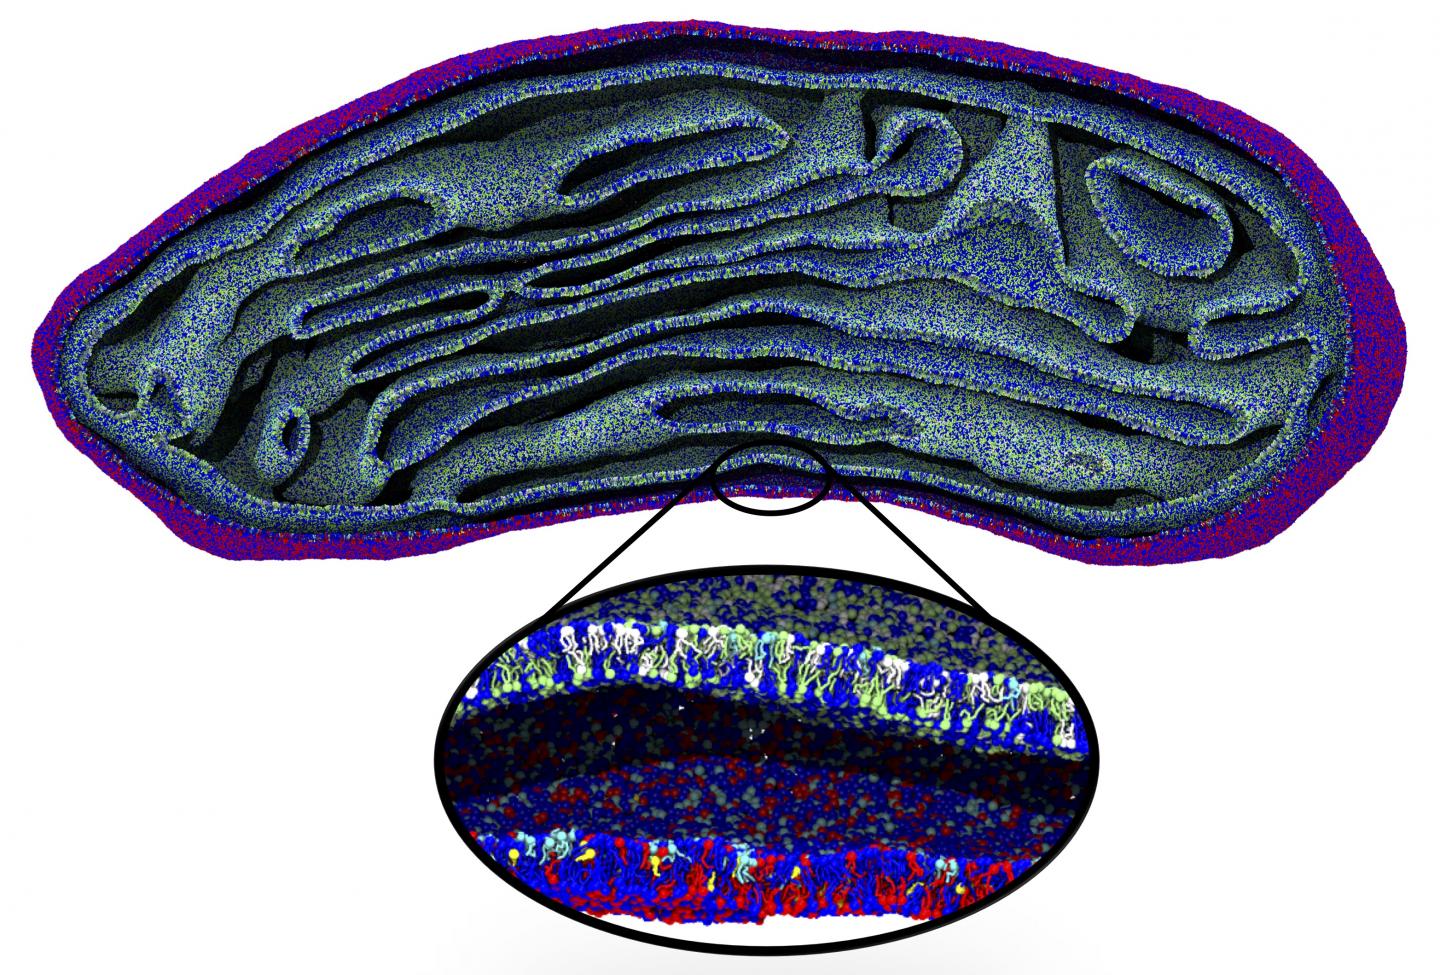 Snapshot of a Simulated Mitochondrion